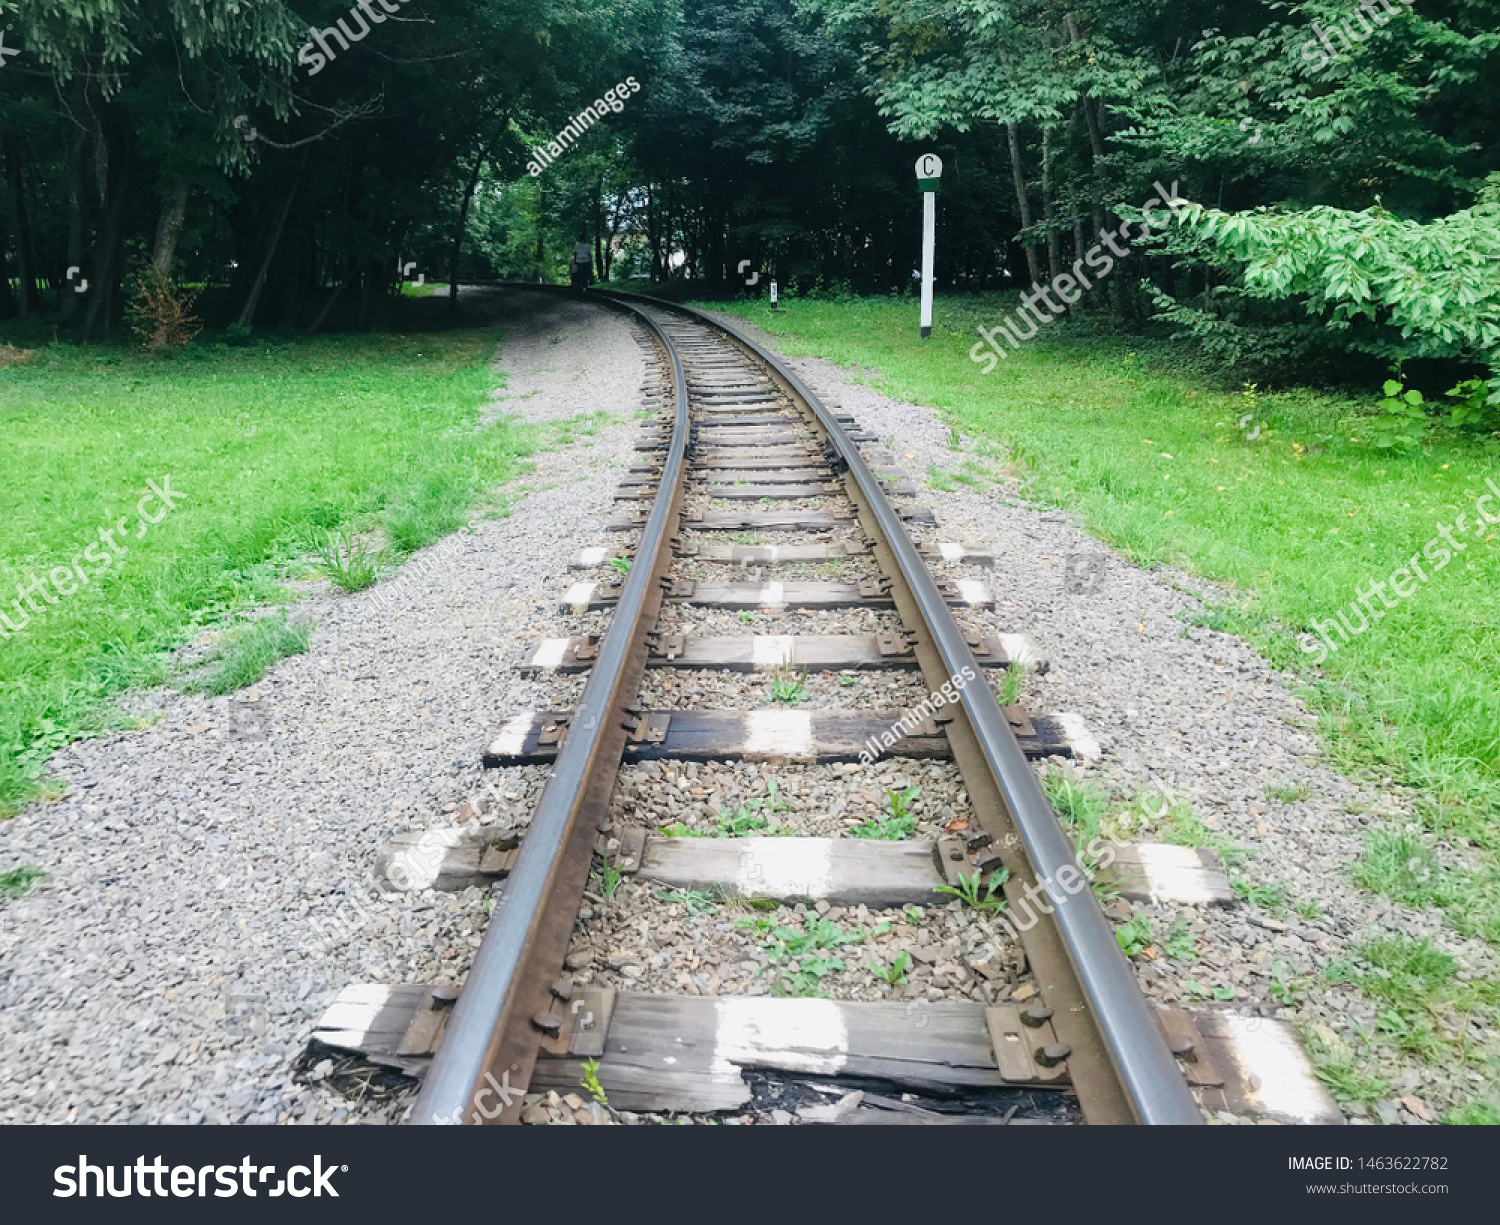 Buying iron rail railroad track thin long old nostalgia wonderful different angles perspectives background image of railroad crossing between green trees. #1463622782